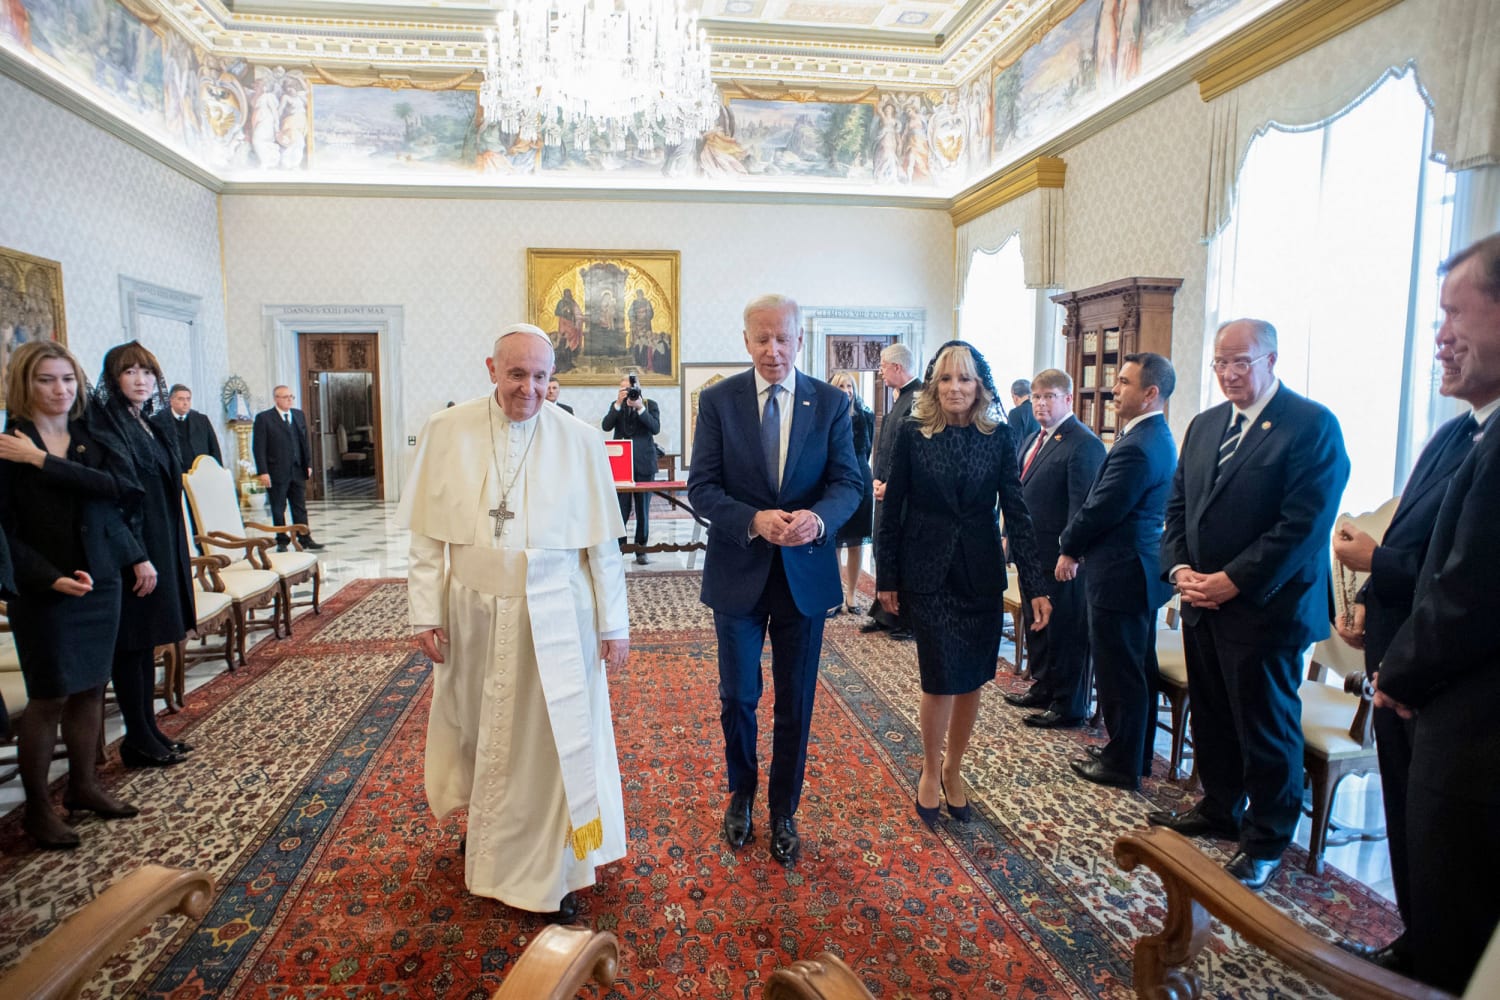 Biden, Pope Francis discuss climate change, Covid-19 in lengthy meeting